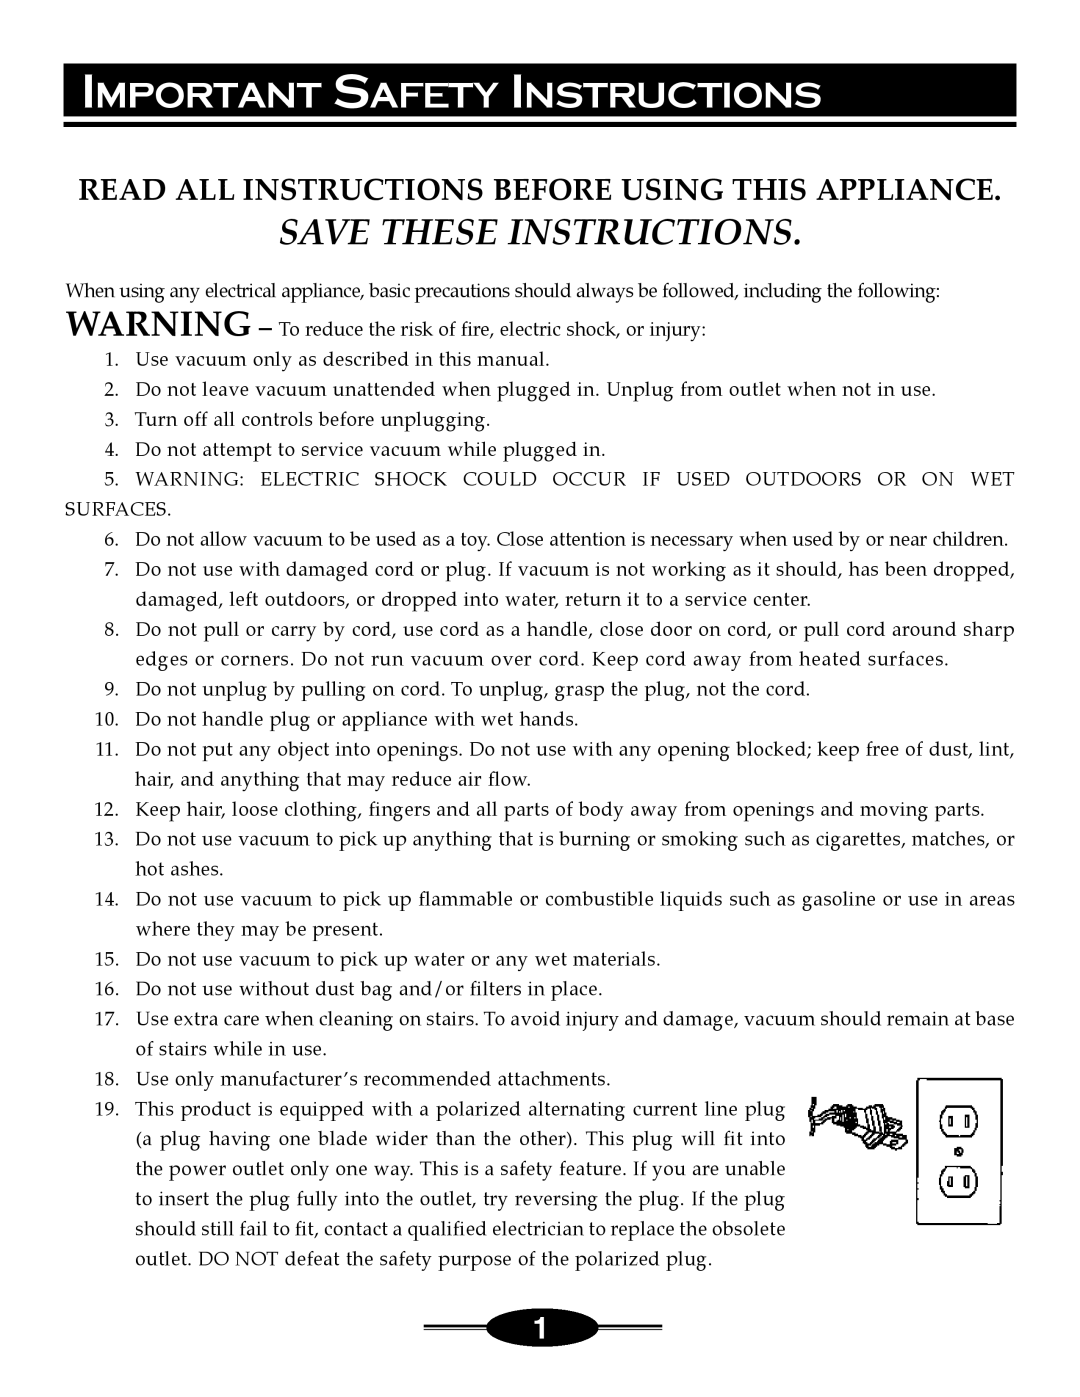 Riccar 4000 Important Safety Instructions, Save These Instructions, Read All Instructions Before Using This Appliance 